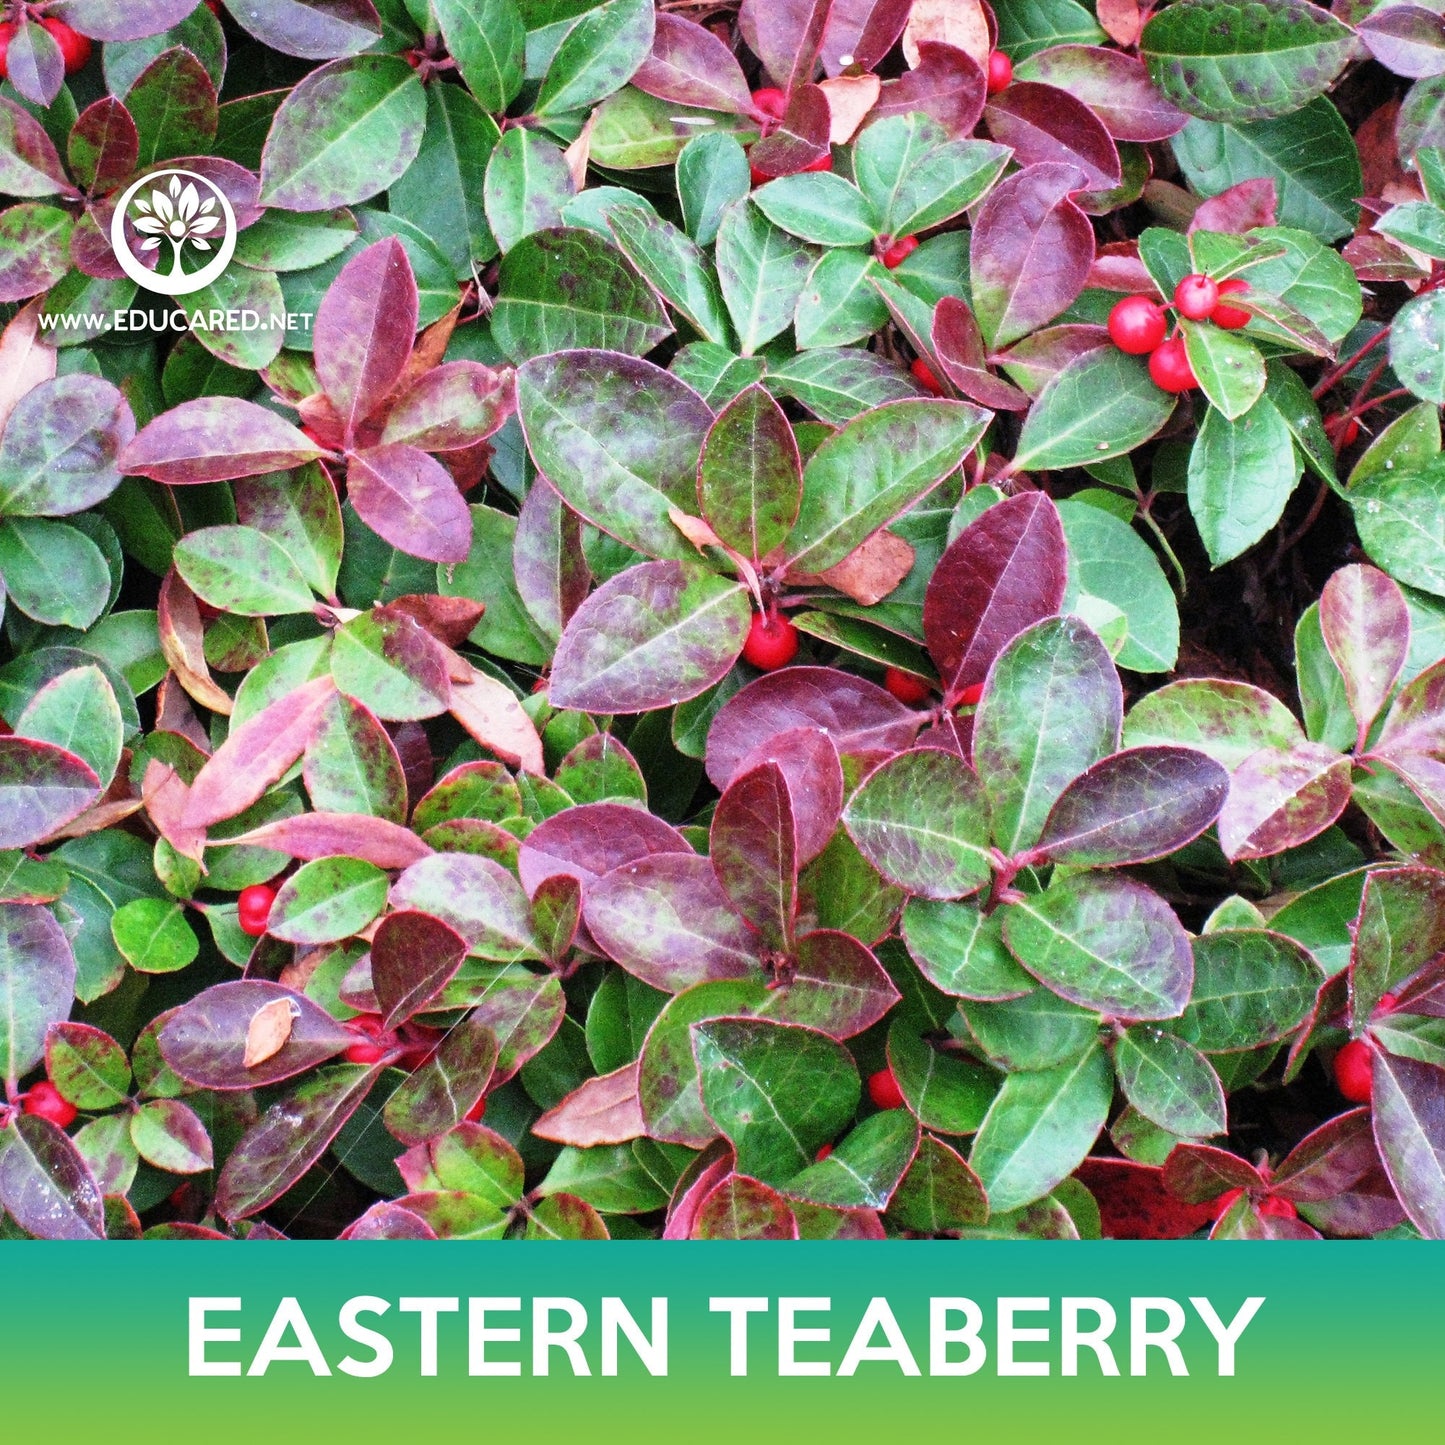 Eastern Teaberry Seeds, American Wintergreen, Gaultheria procumbens